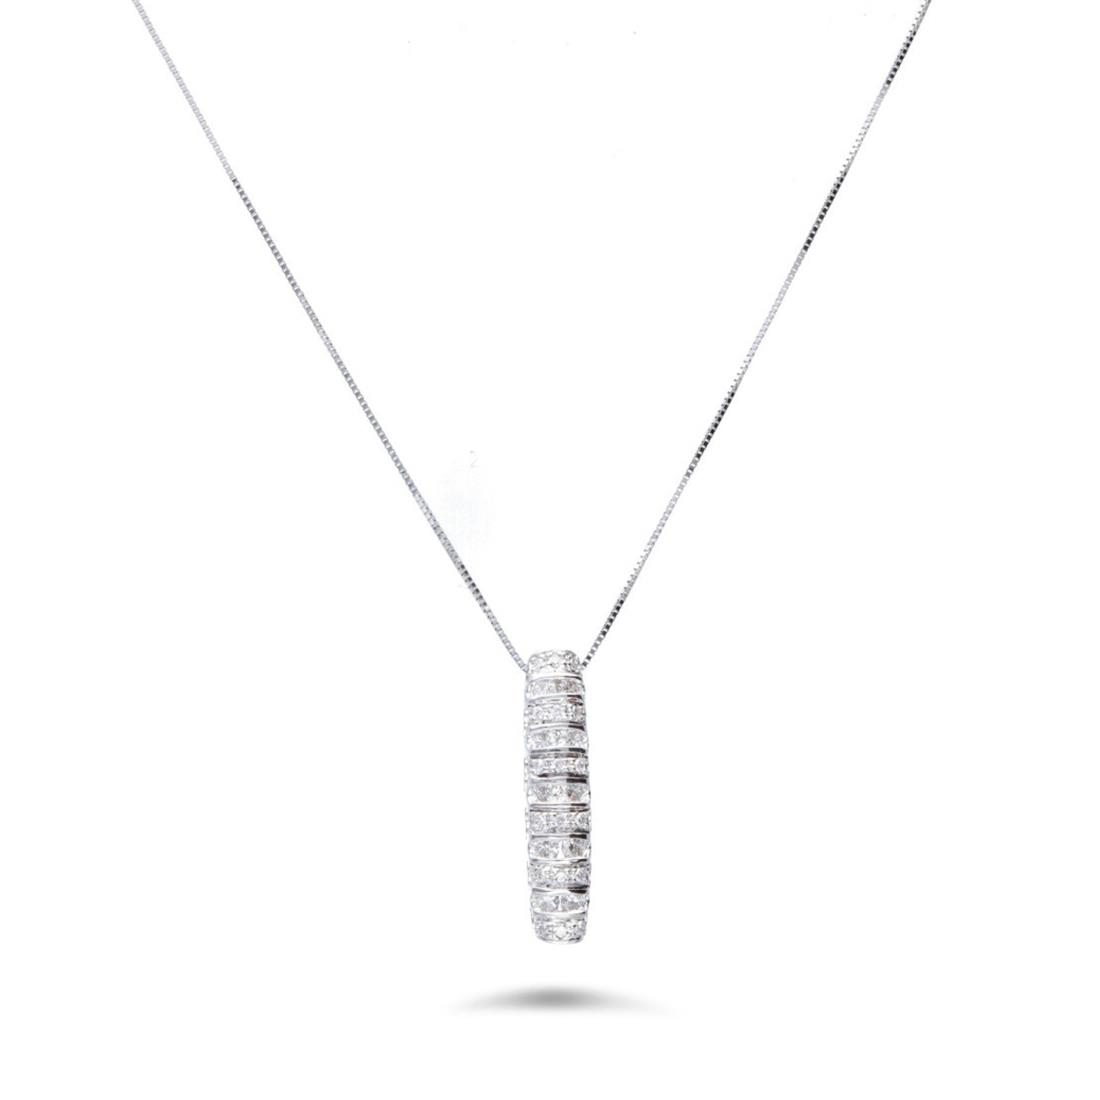 Necklace with pendant with diamonds - BLISS